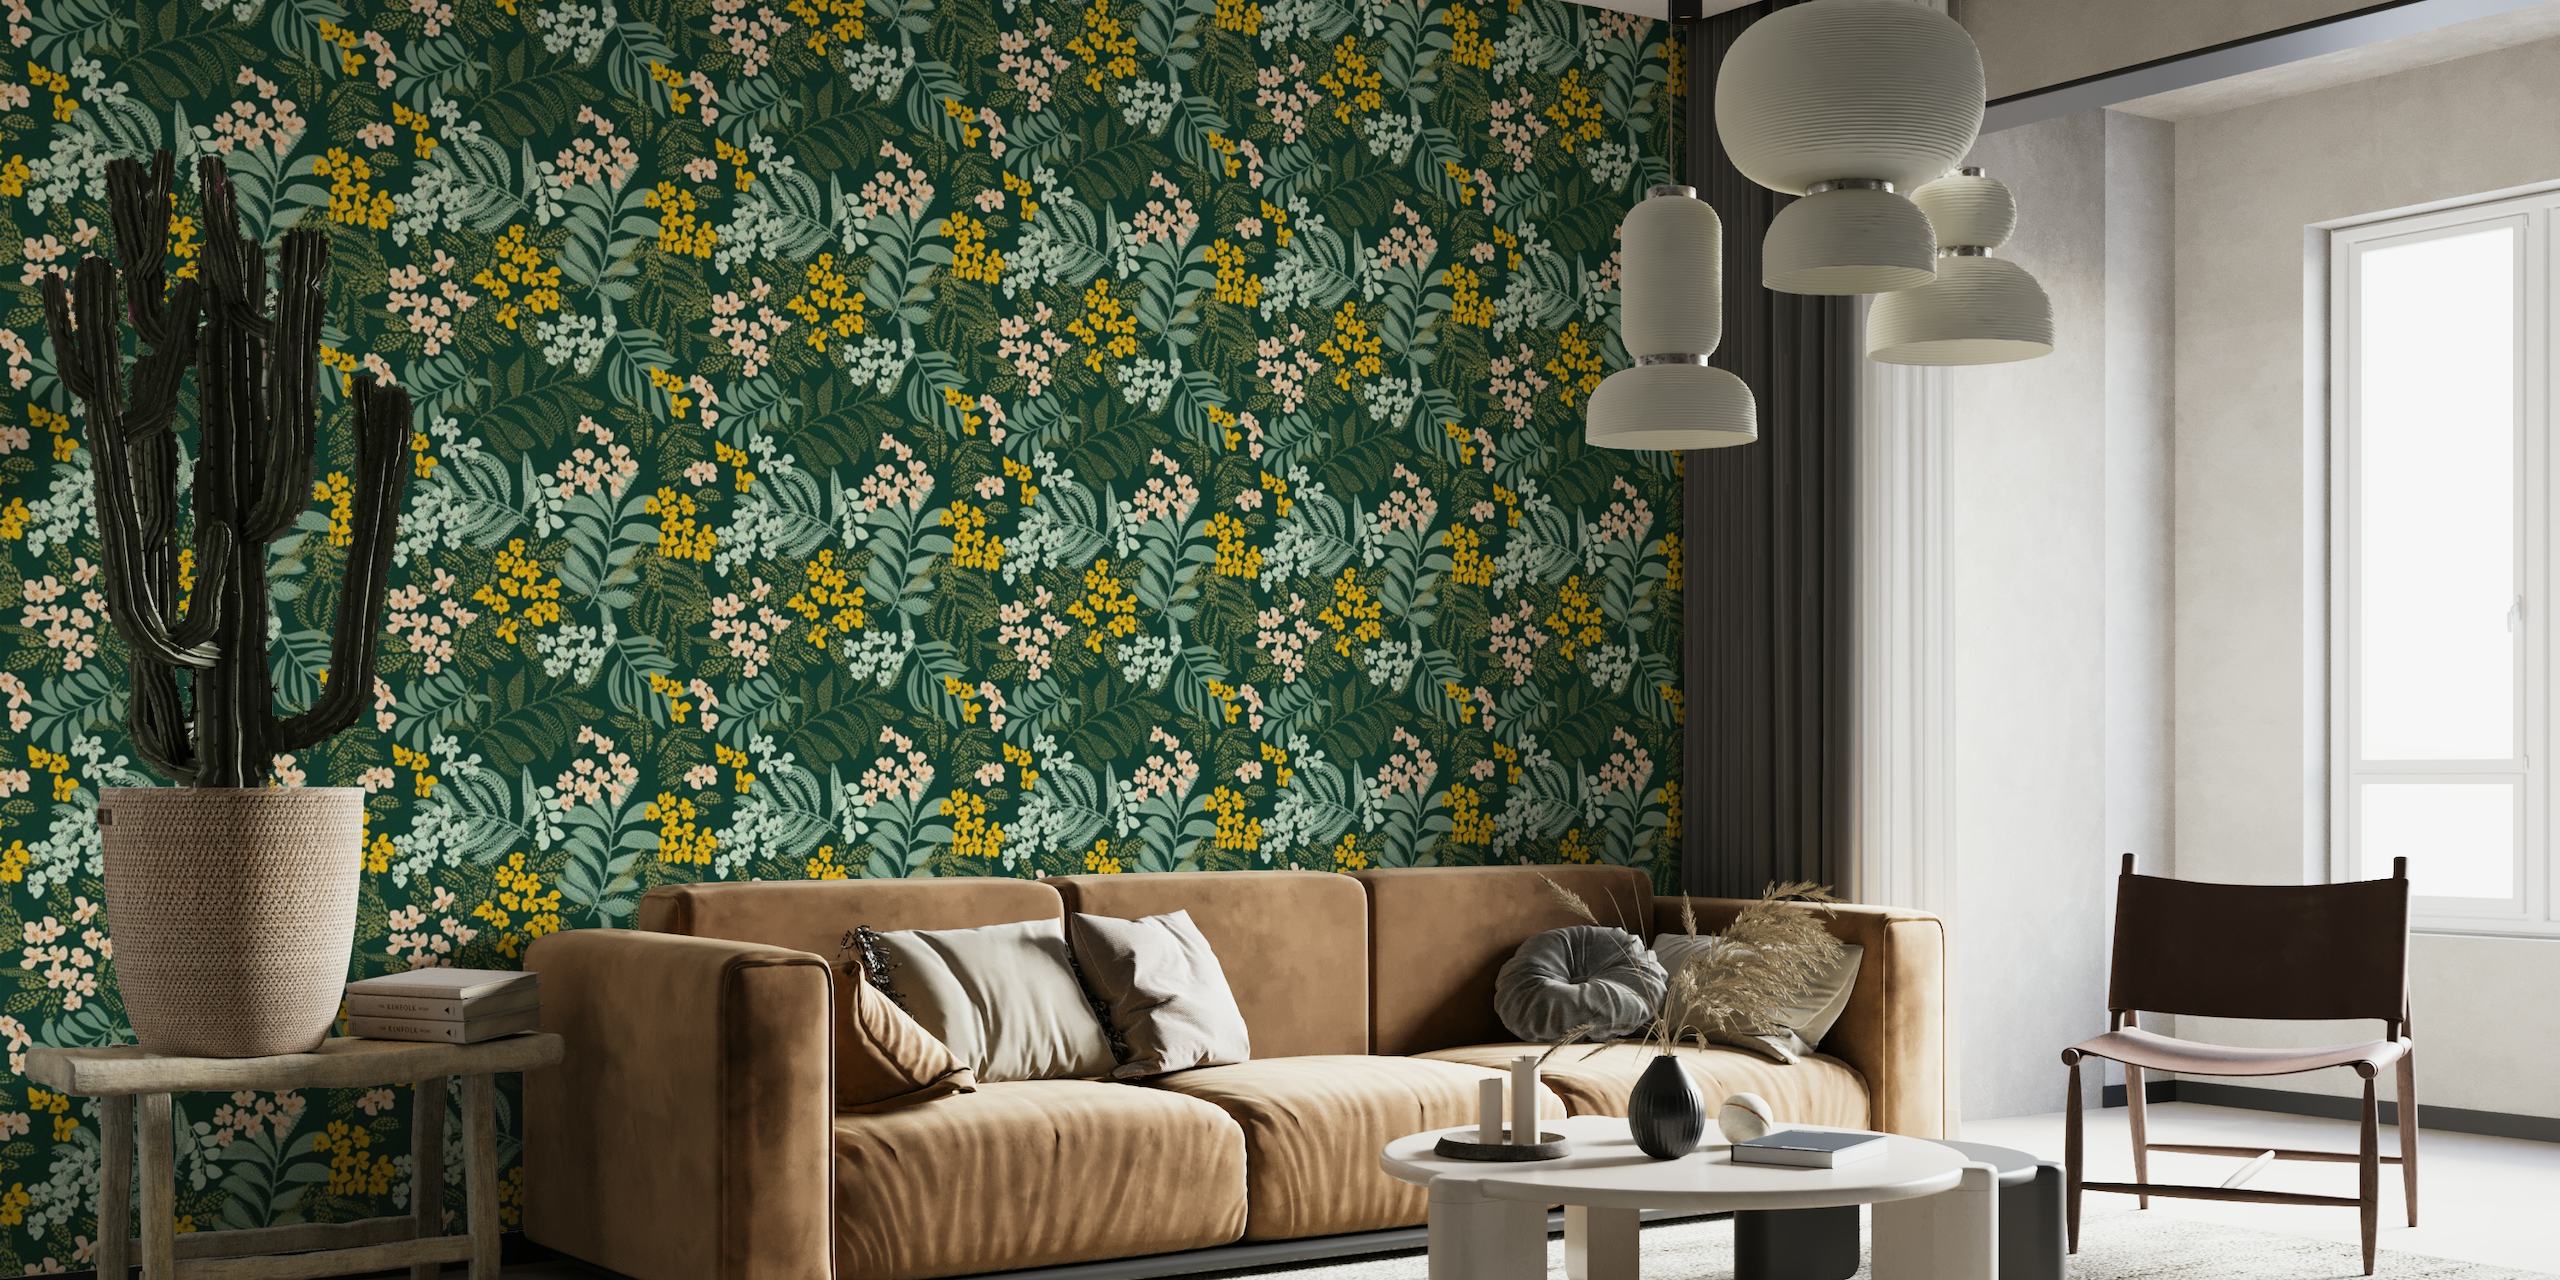 Emerald green wall mural with autumn leaves pattern